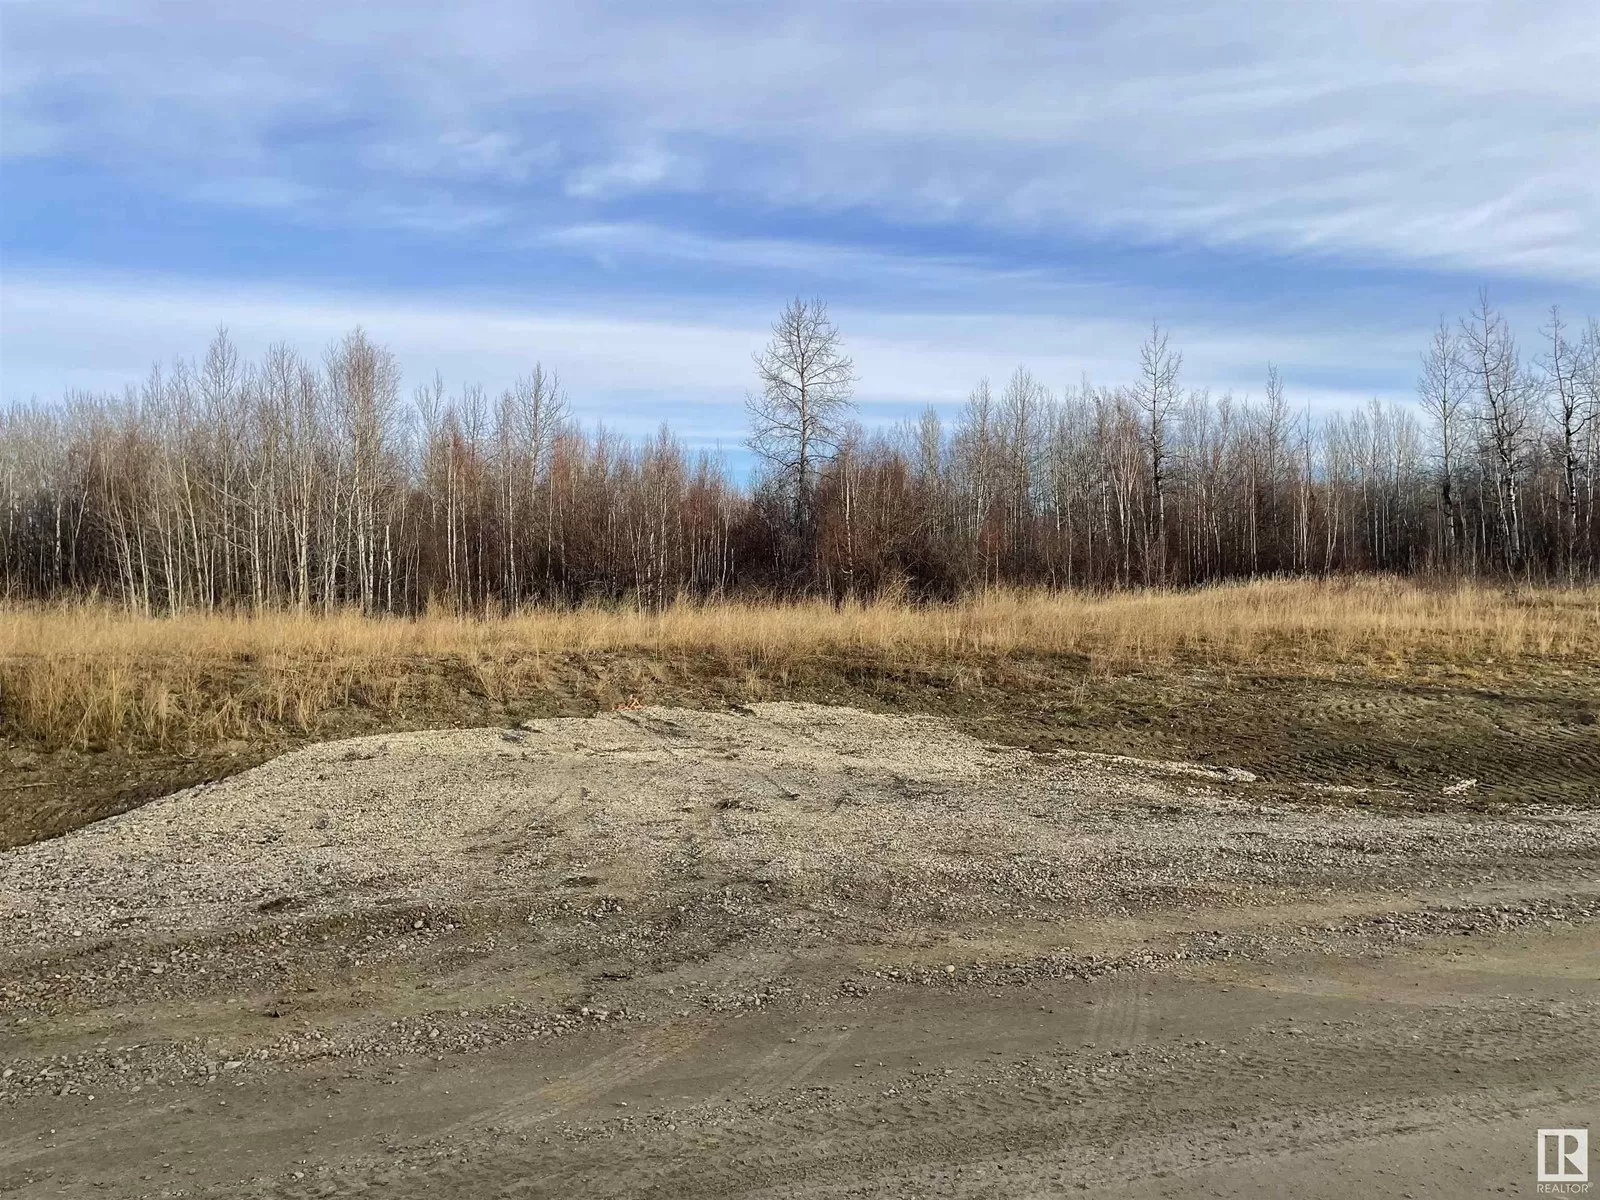 No Building for rent: Twp 484 Rr 60, Rural Brazeau County, Alberta T7A 2A3